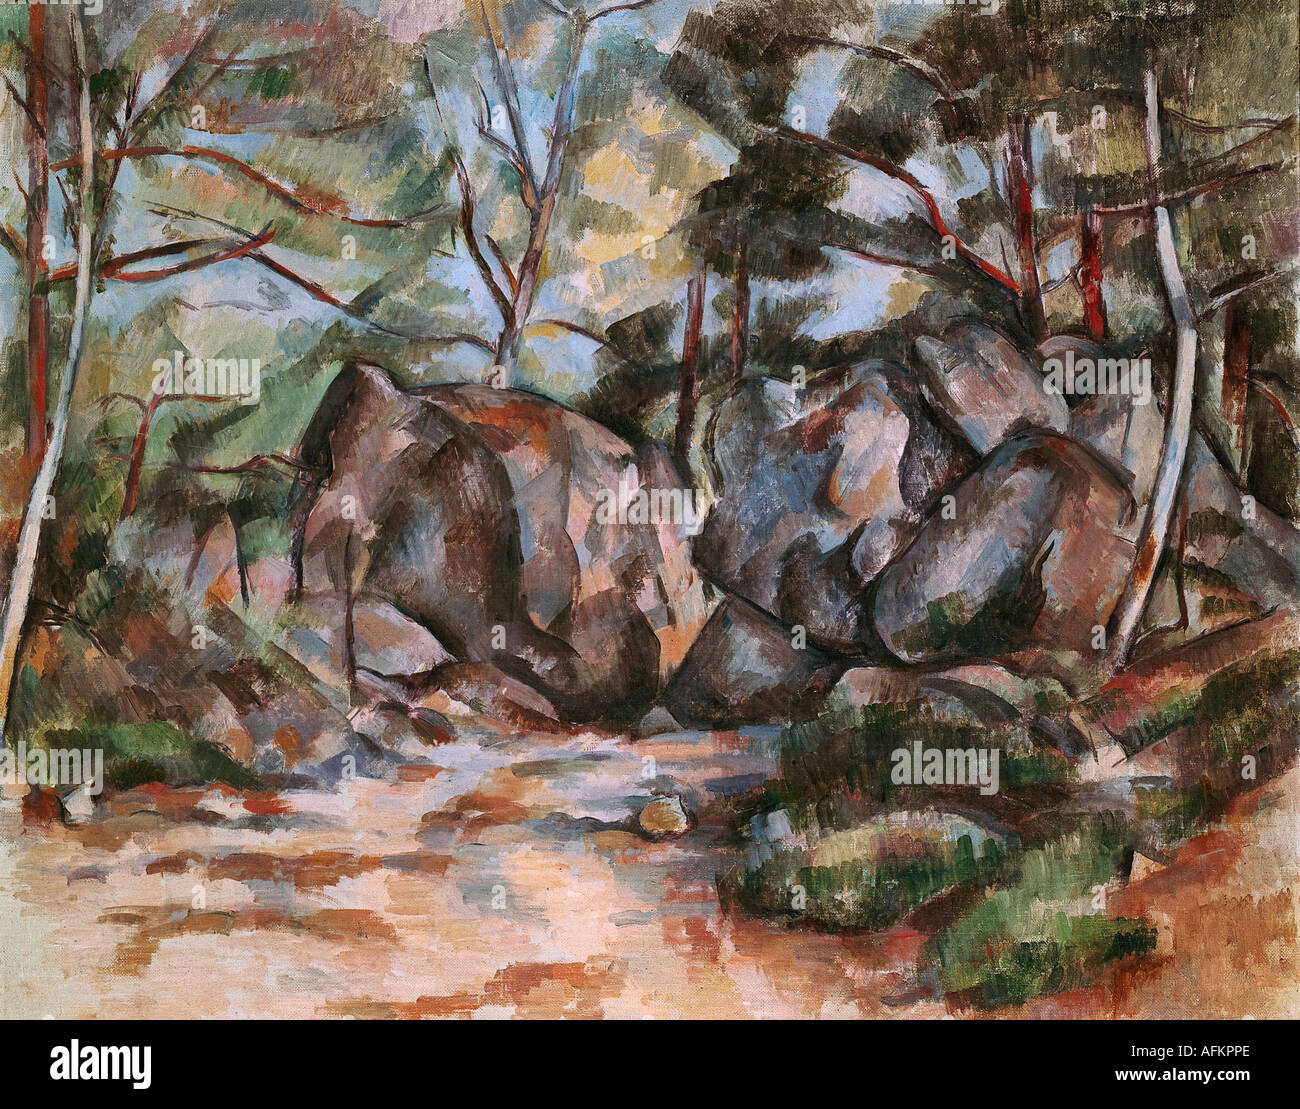 fine arts, Cezanne, Paul (1839 - 1906), painting, forrest with 